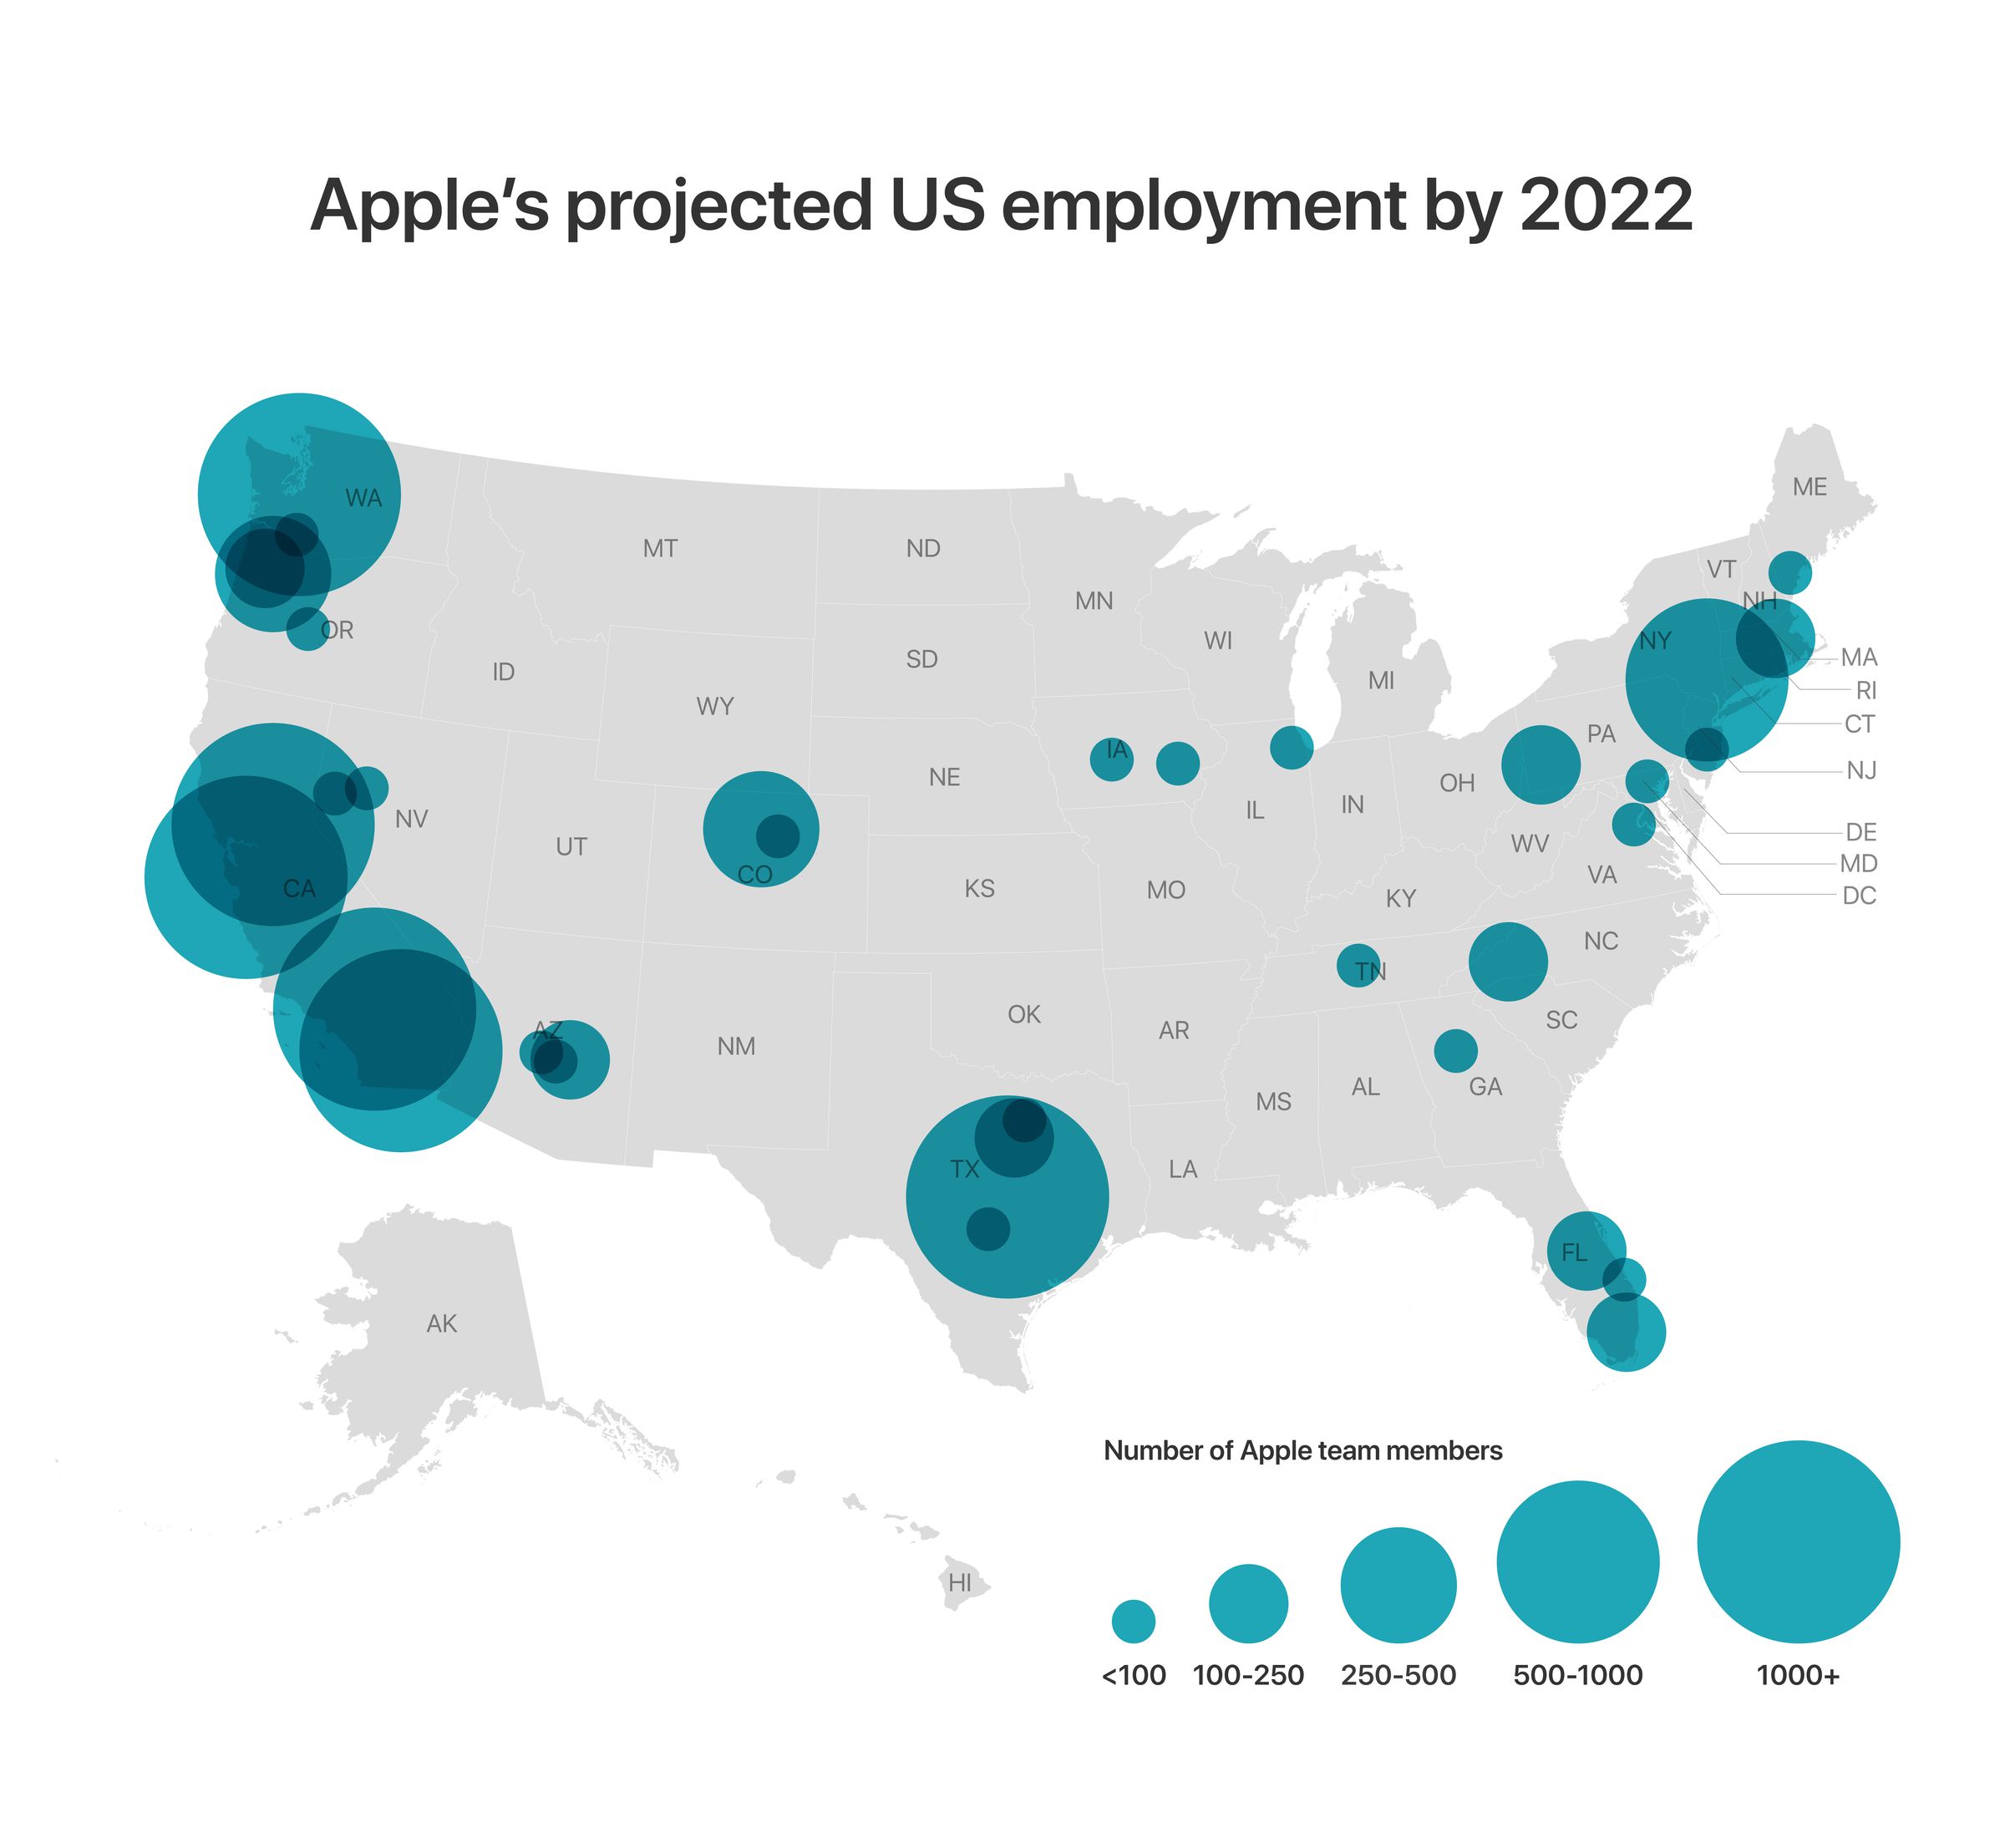 Apple’s expansion plans will include multiple states across the US. 